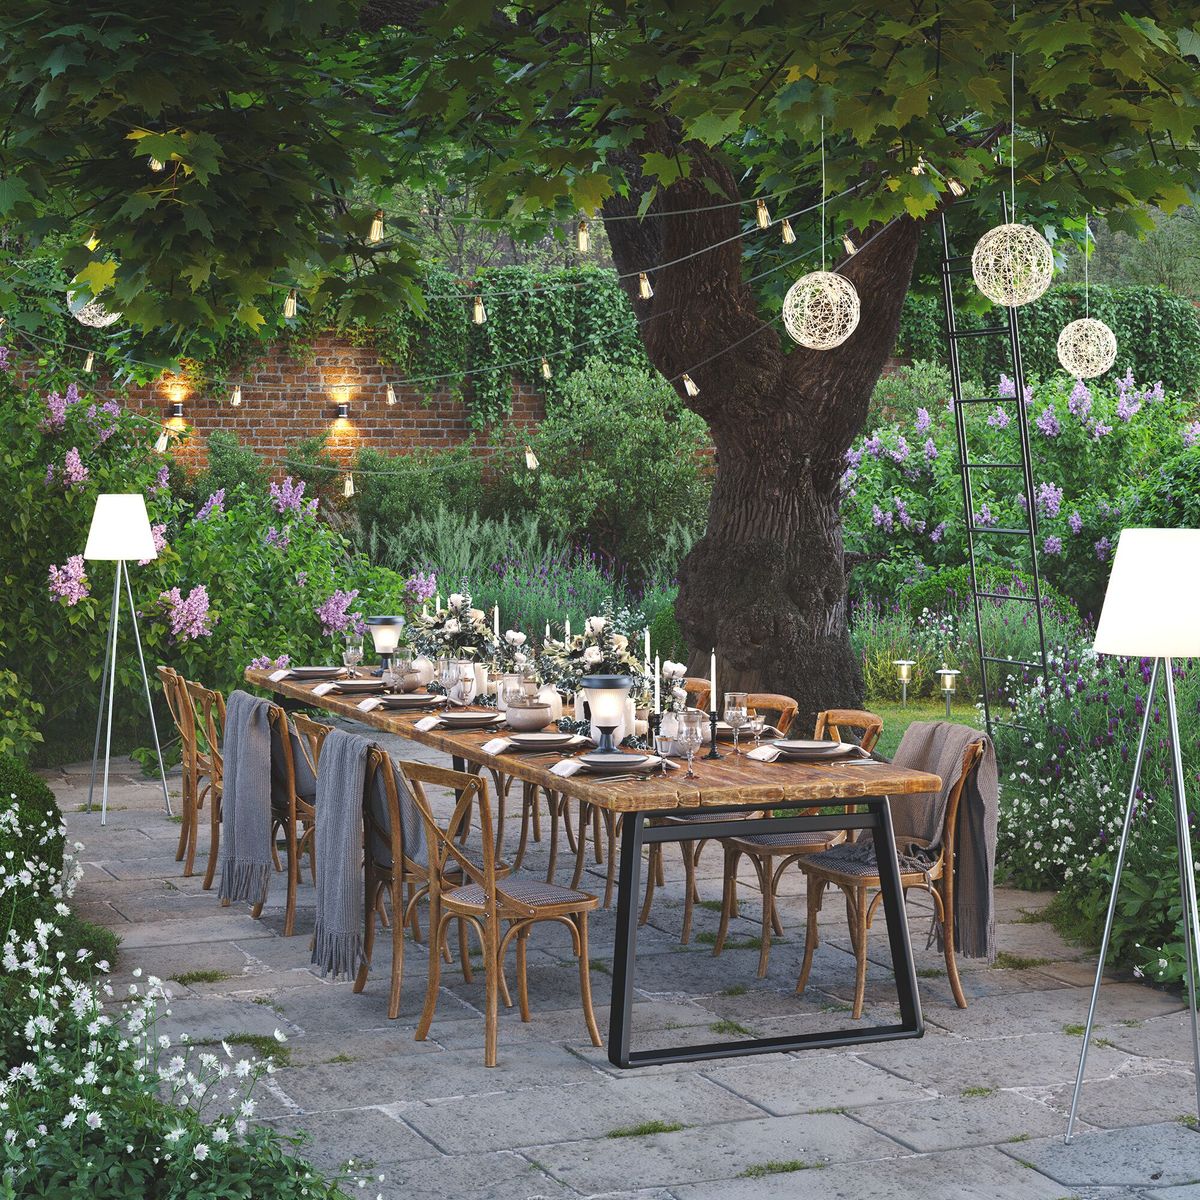 Create Outdoor Ambiance with Deck Lighting - Ideas & Advice